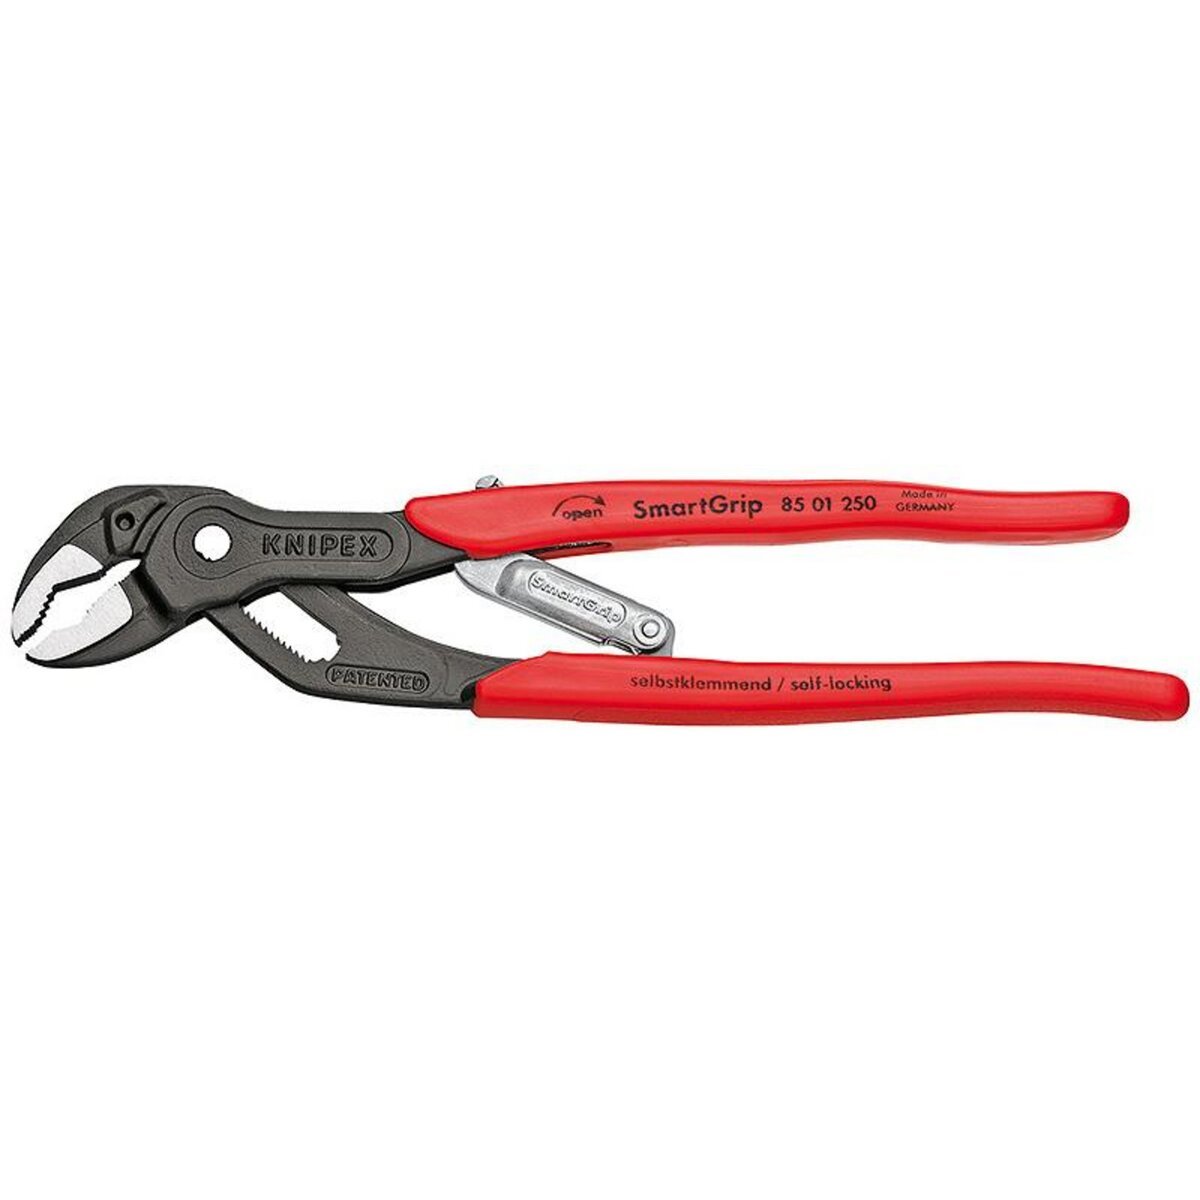 Knipex Pince multiprise Smartgrip 250 mm